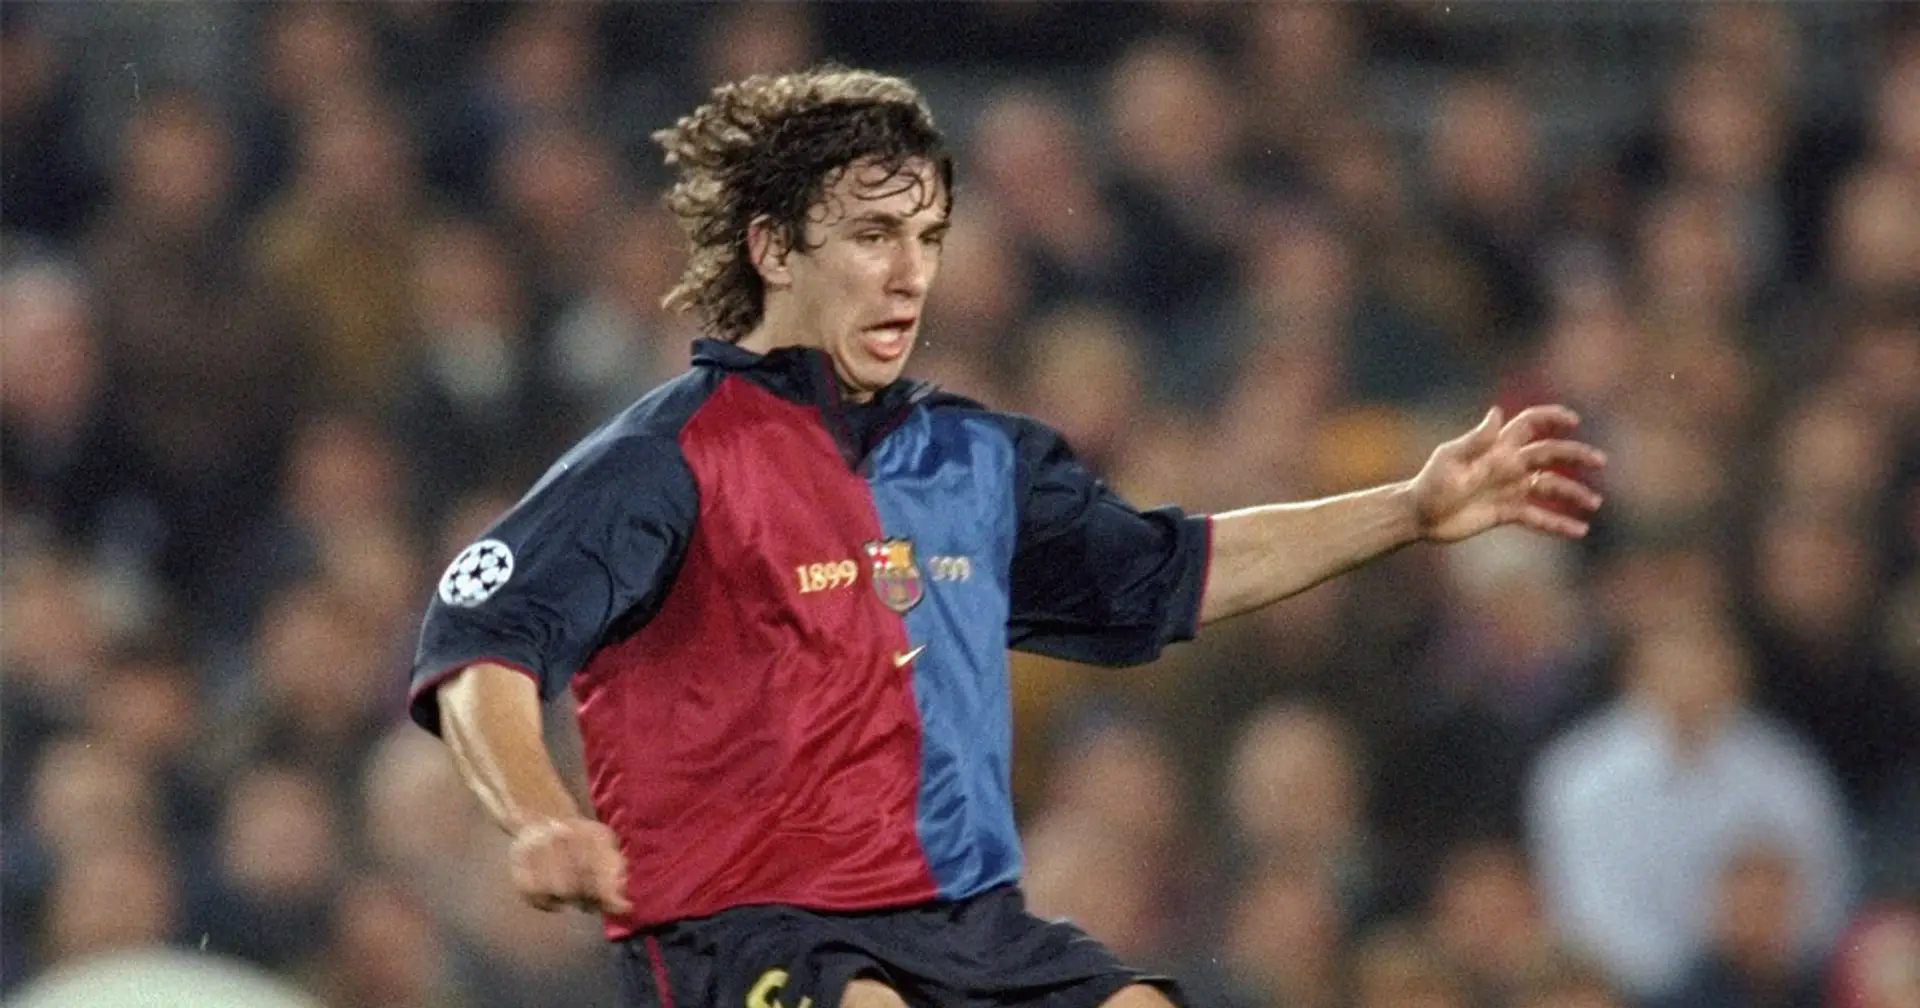 'Didn't even take me a minute': Puyol remembers rejecting profitable Malaga offer as a youngster for chance at Camp Nou